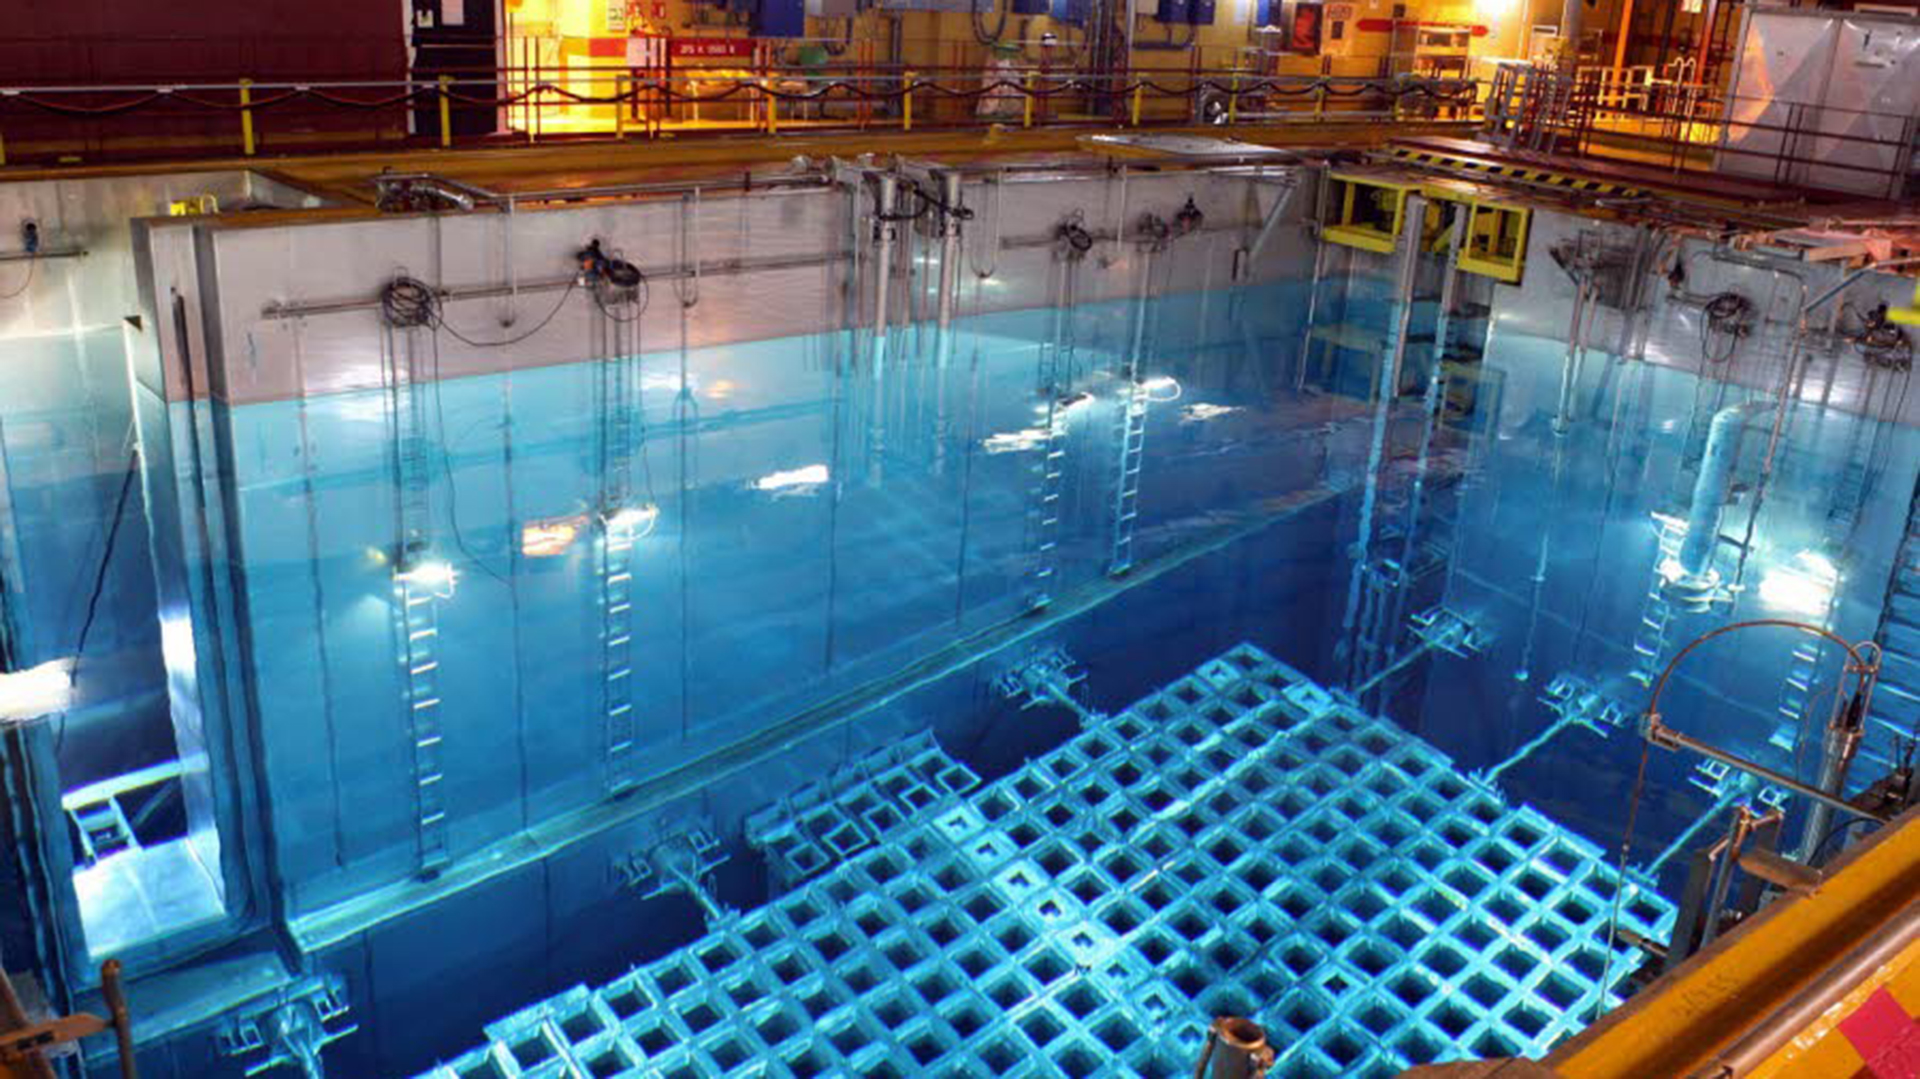 Wet interim storage for spent nuclear fuel wins Hang Award